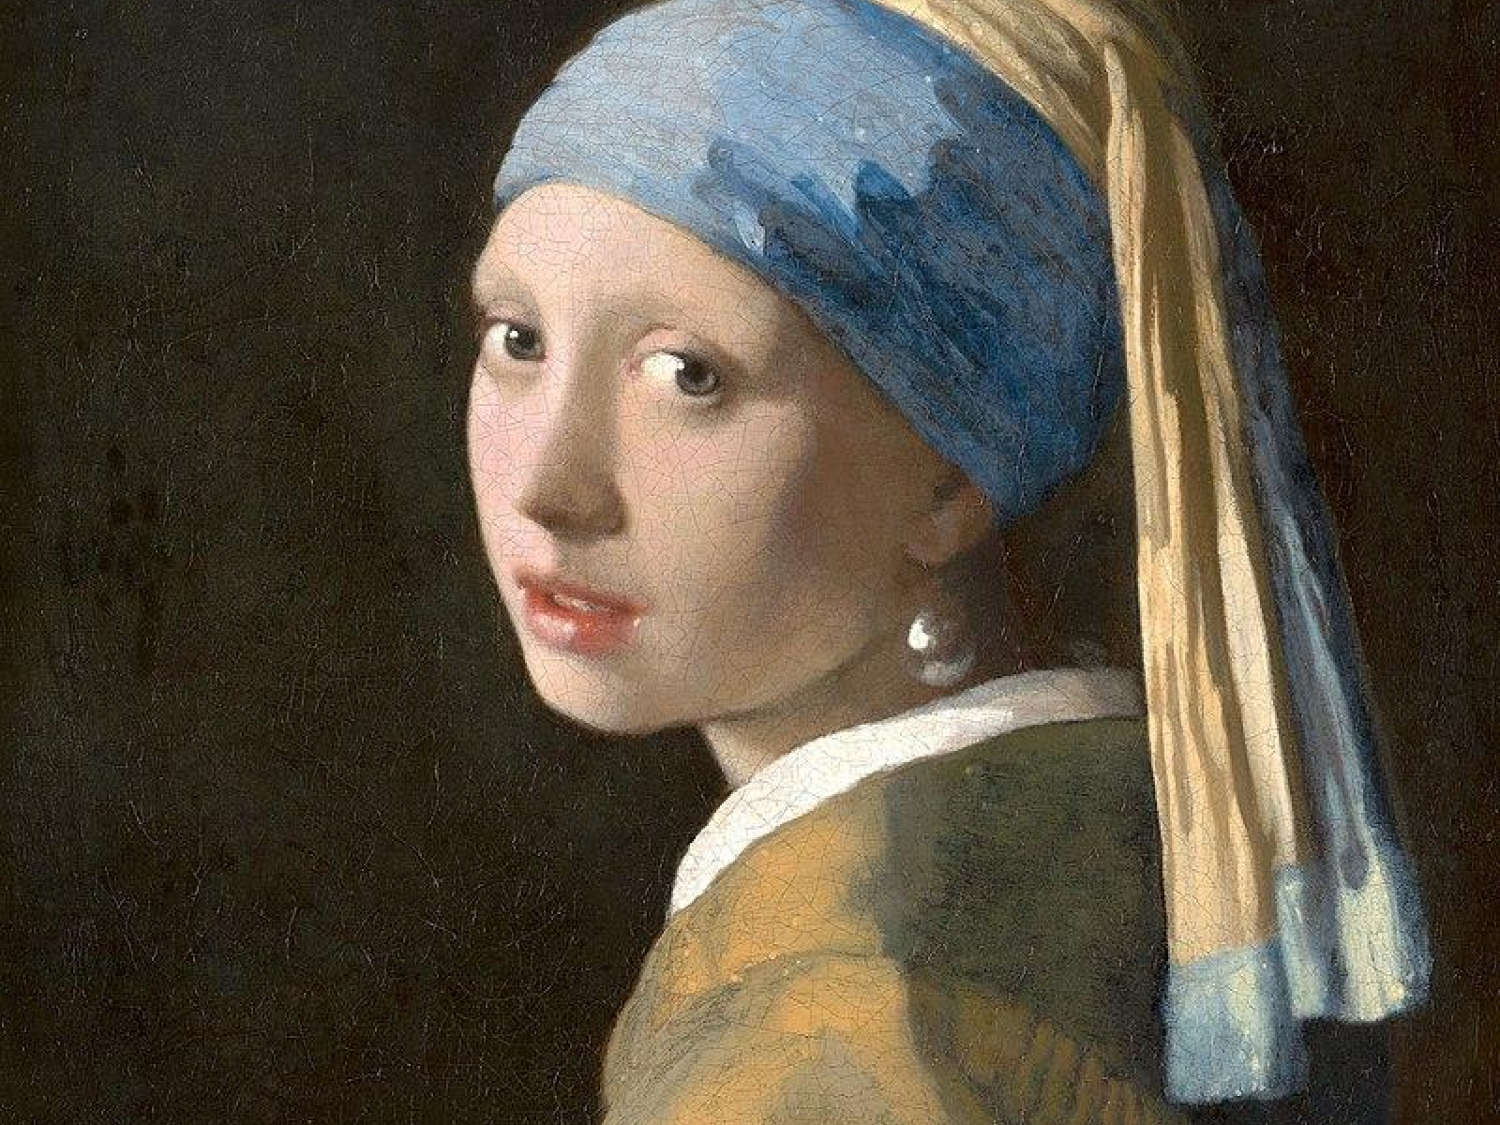 Vermeer's renowned portrait, Girl with the Pearl Earring